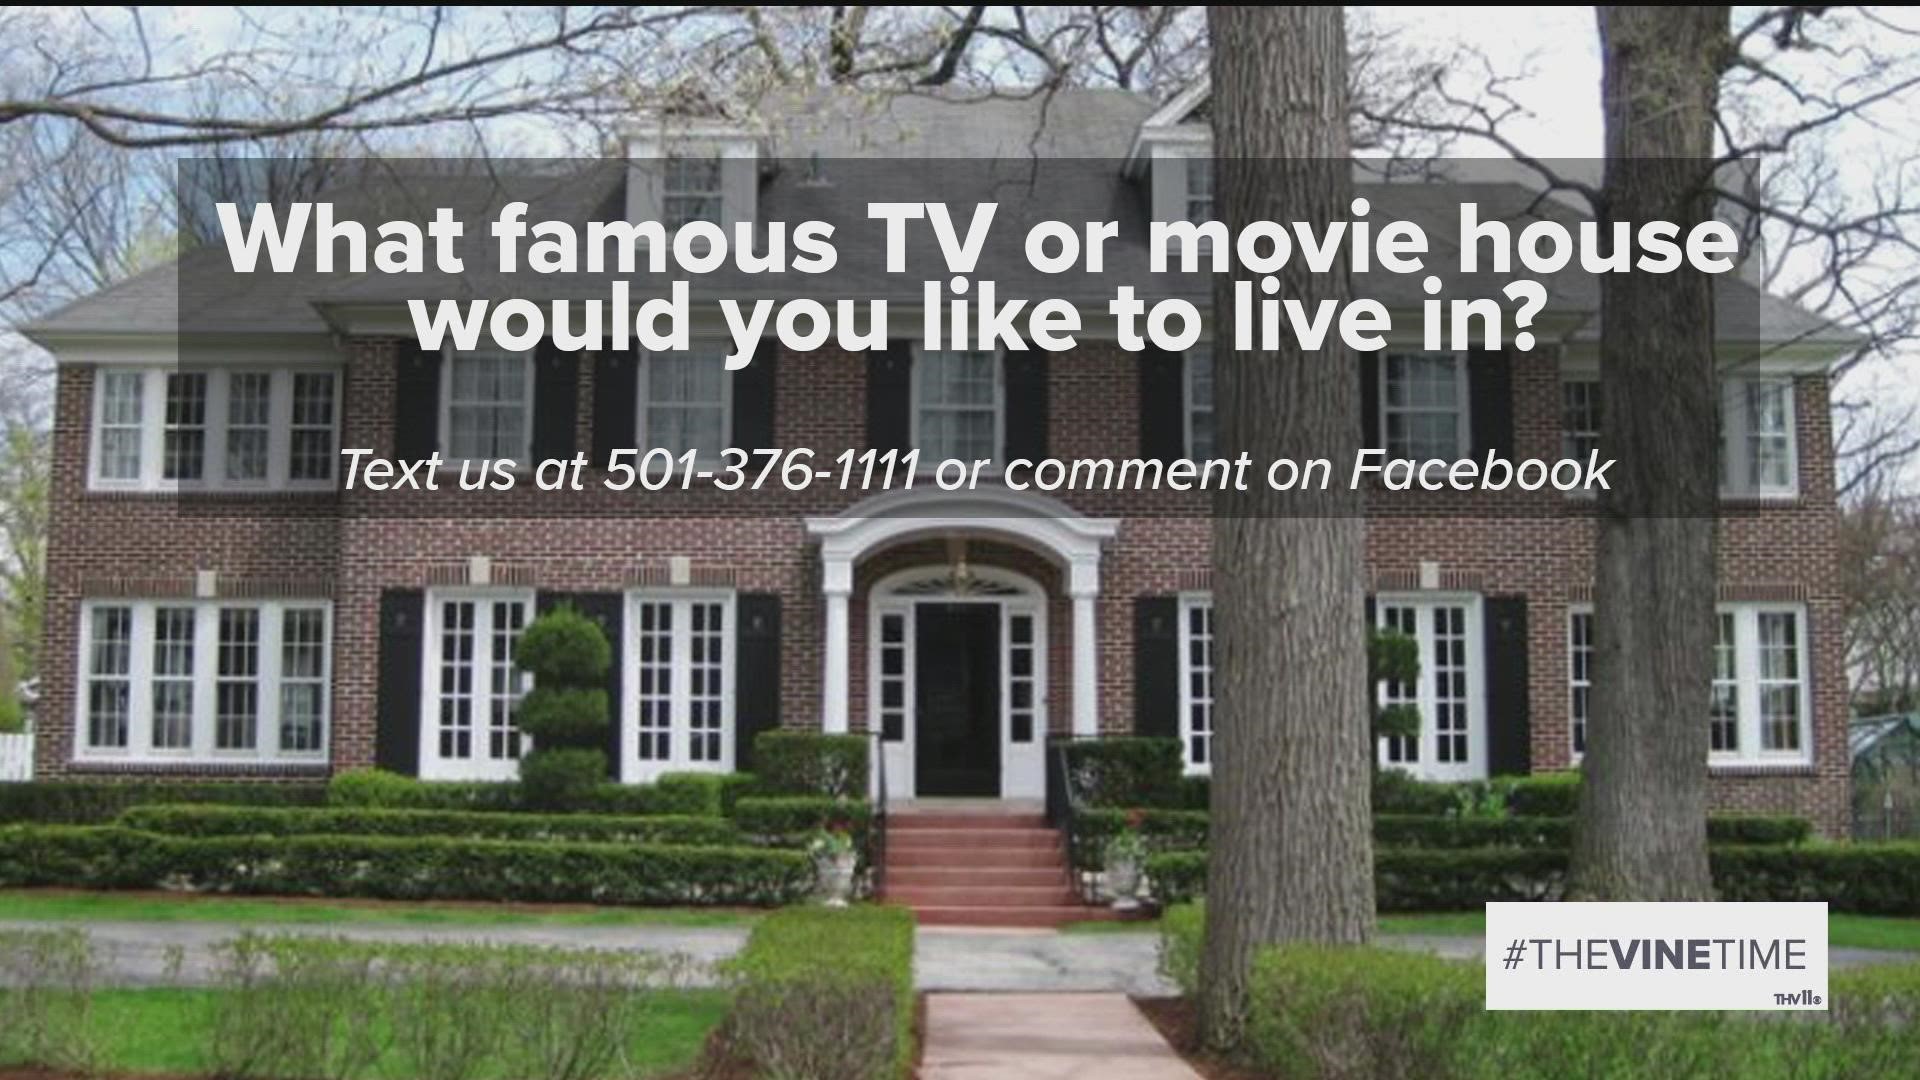 Our morning talker question is: what famous house from a TV or movie would you like to live in?